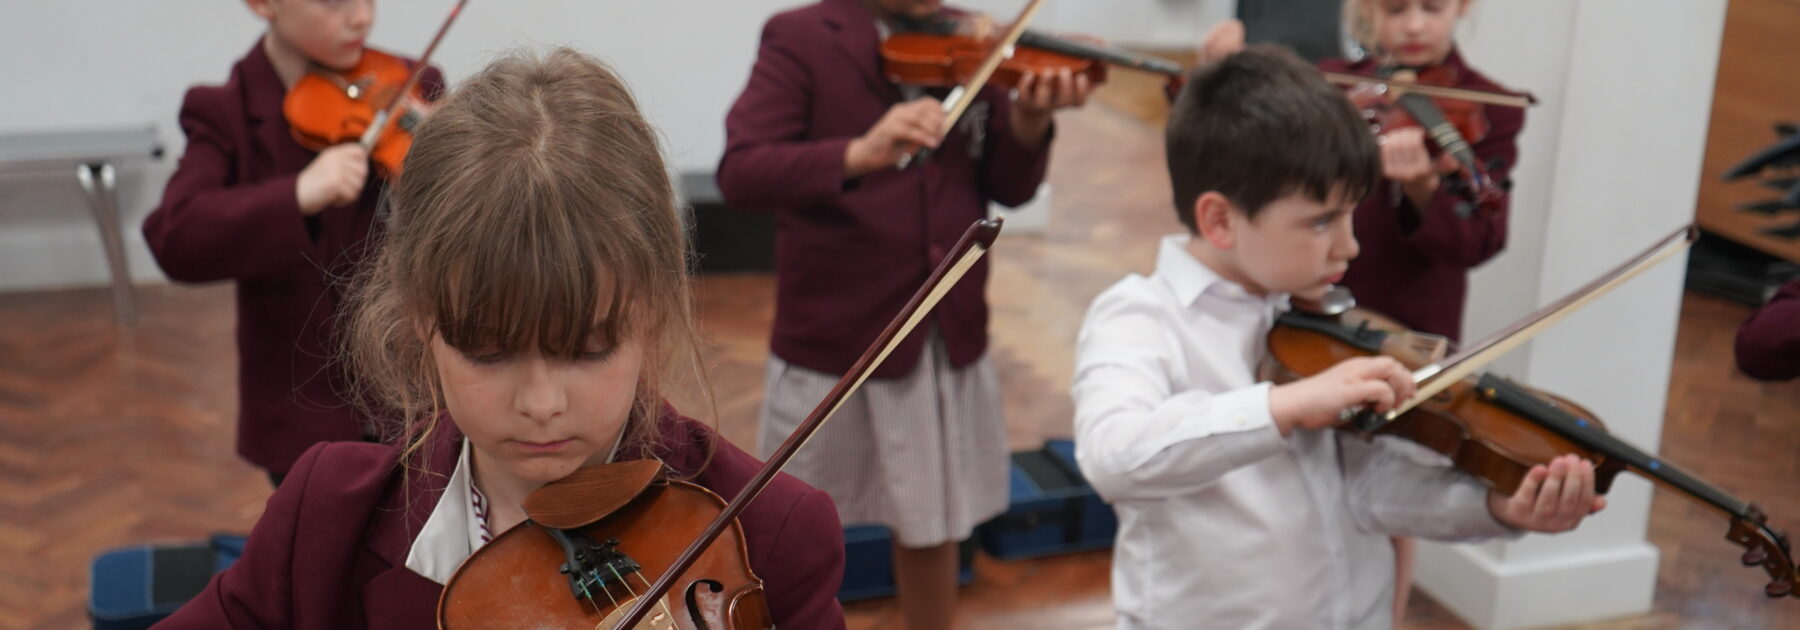 Bows to Strings for Year 2 Musicians